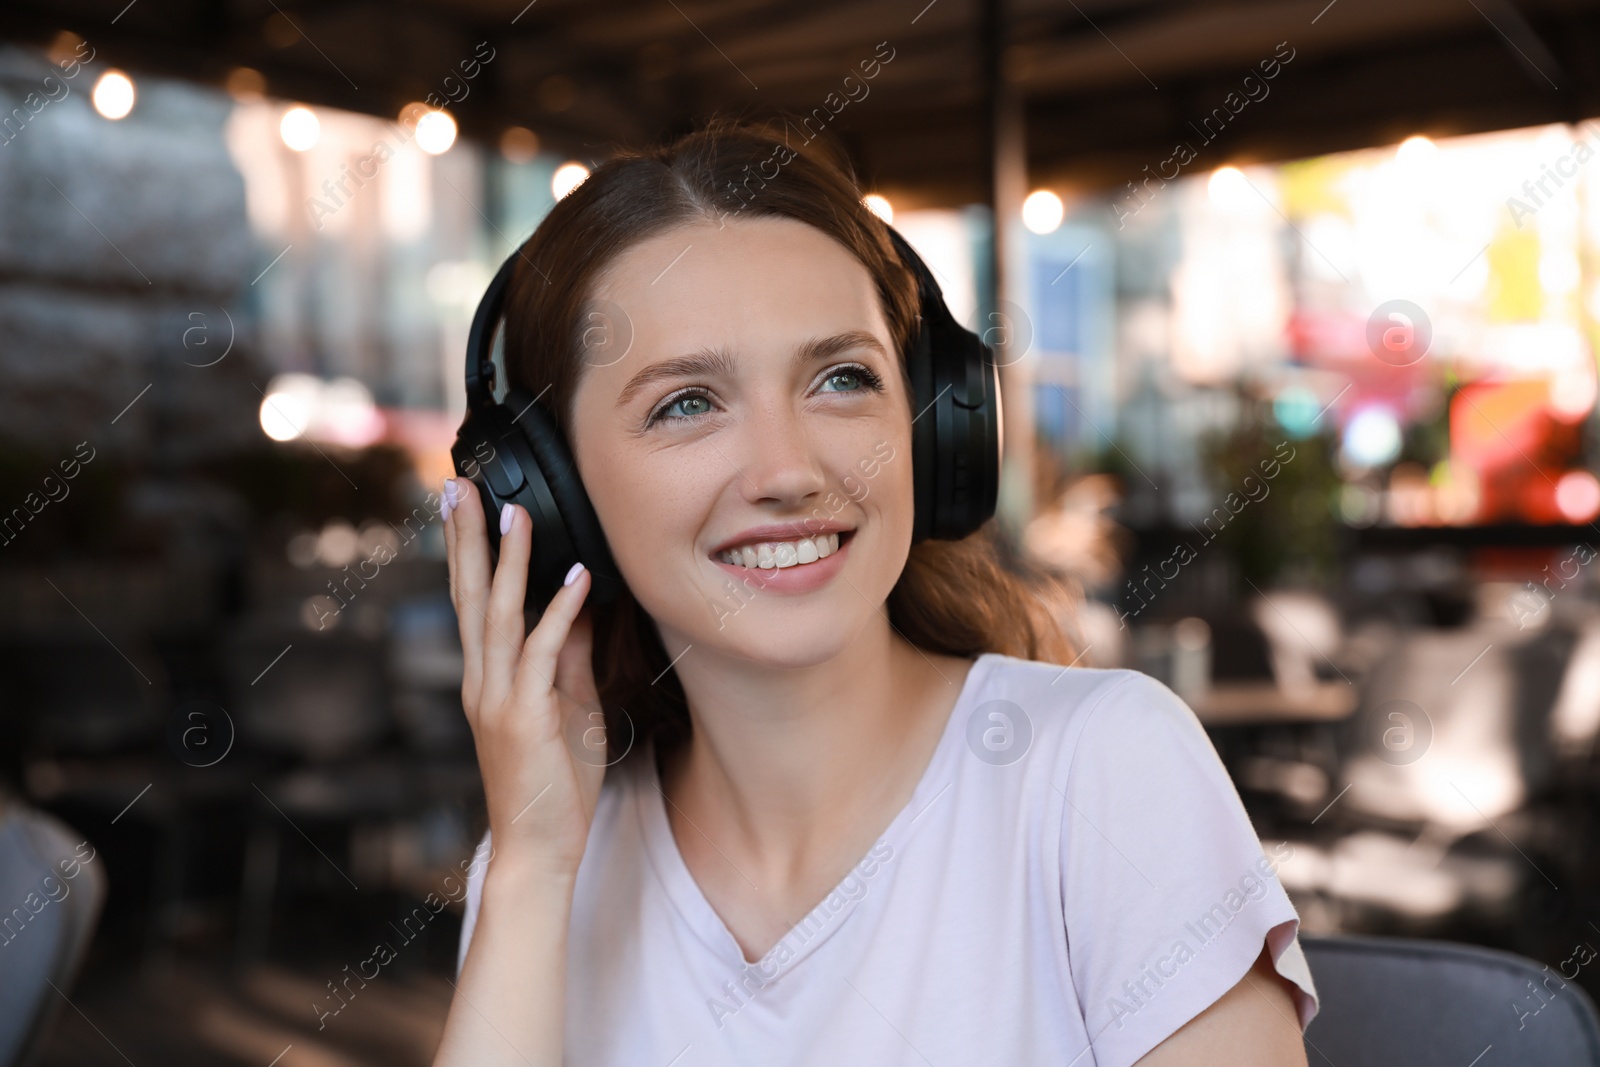 Photo of Smiling woman in headphones listening to music in outdoor cafe